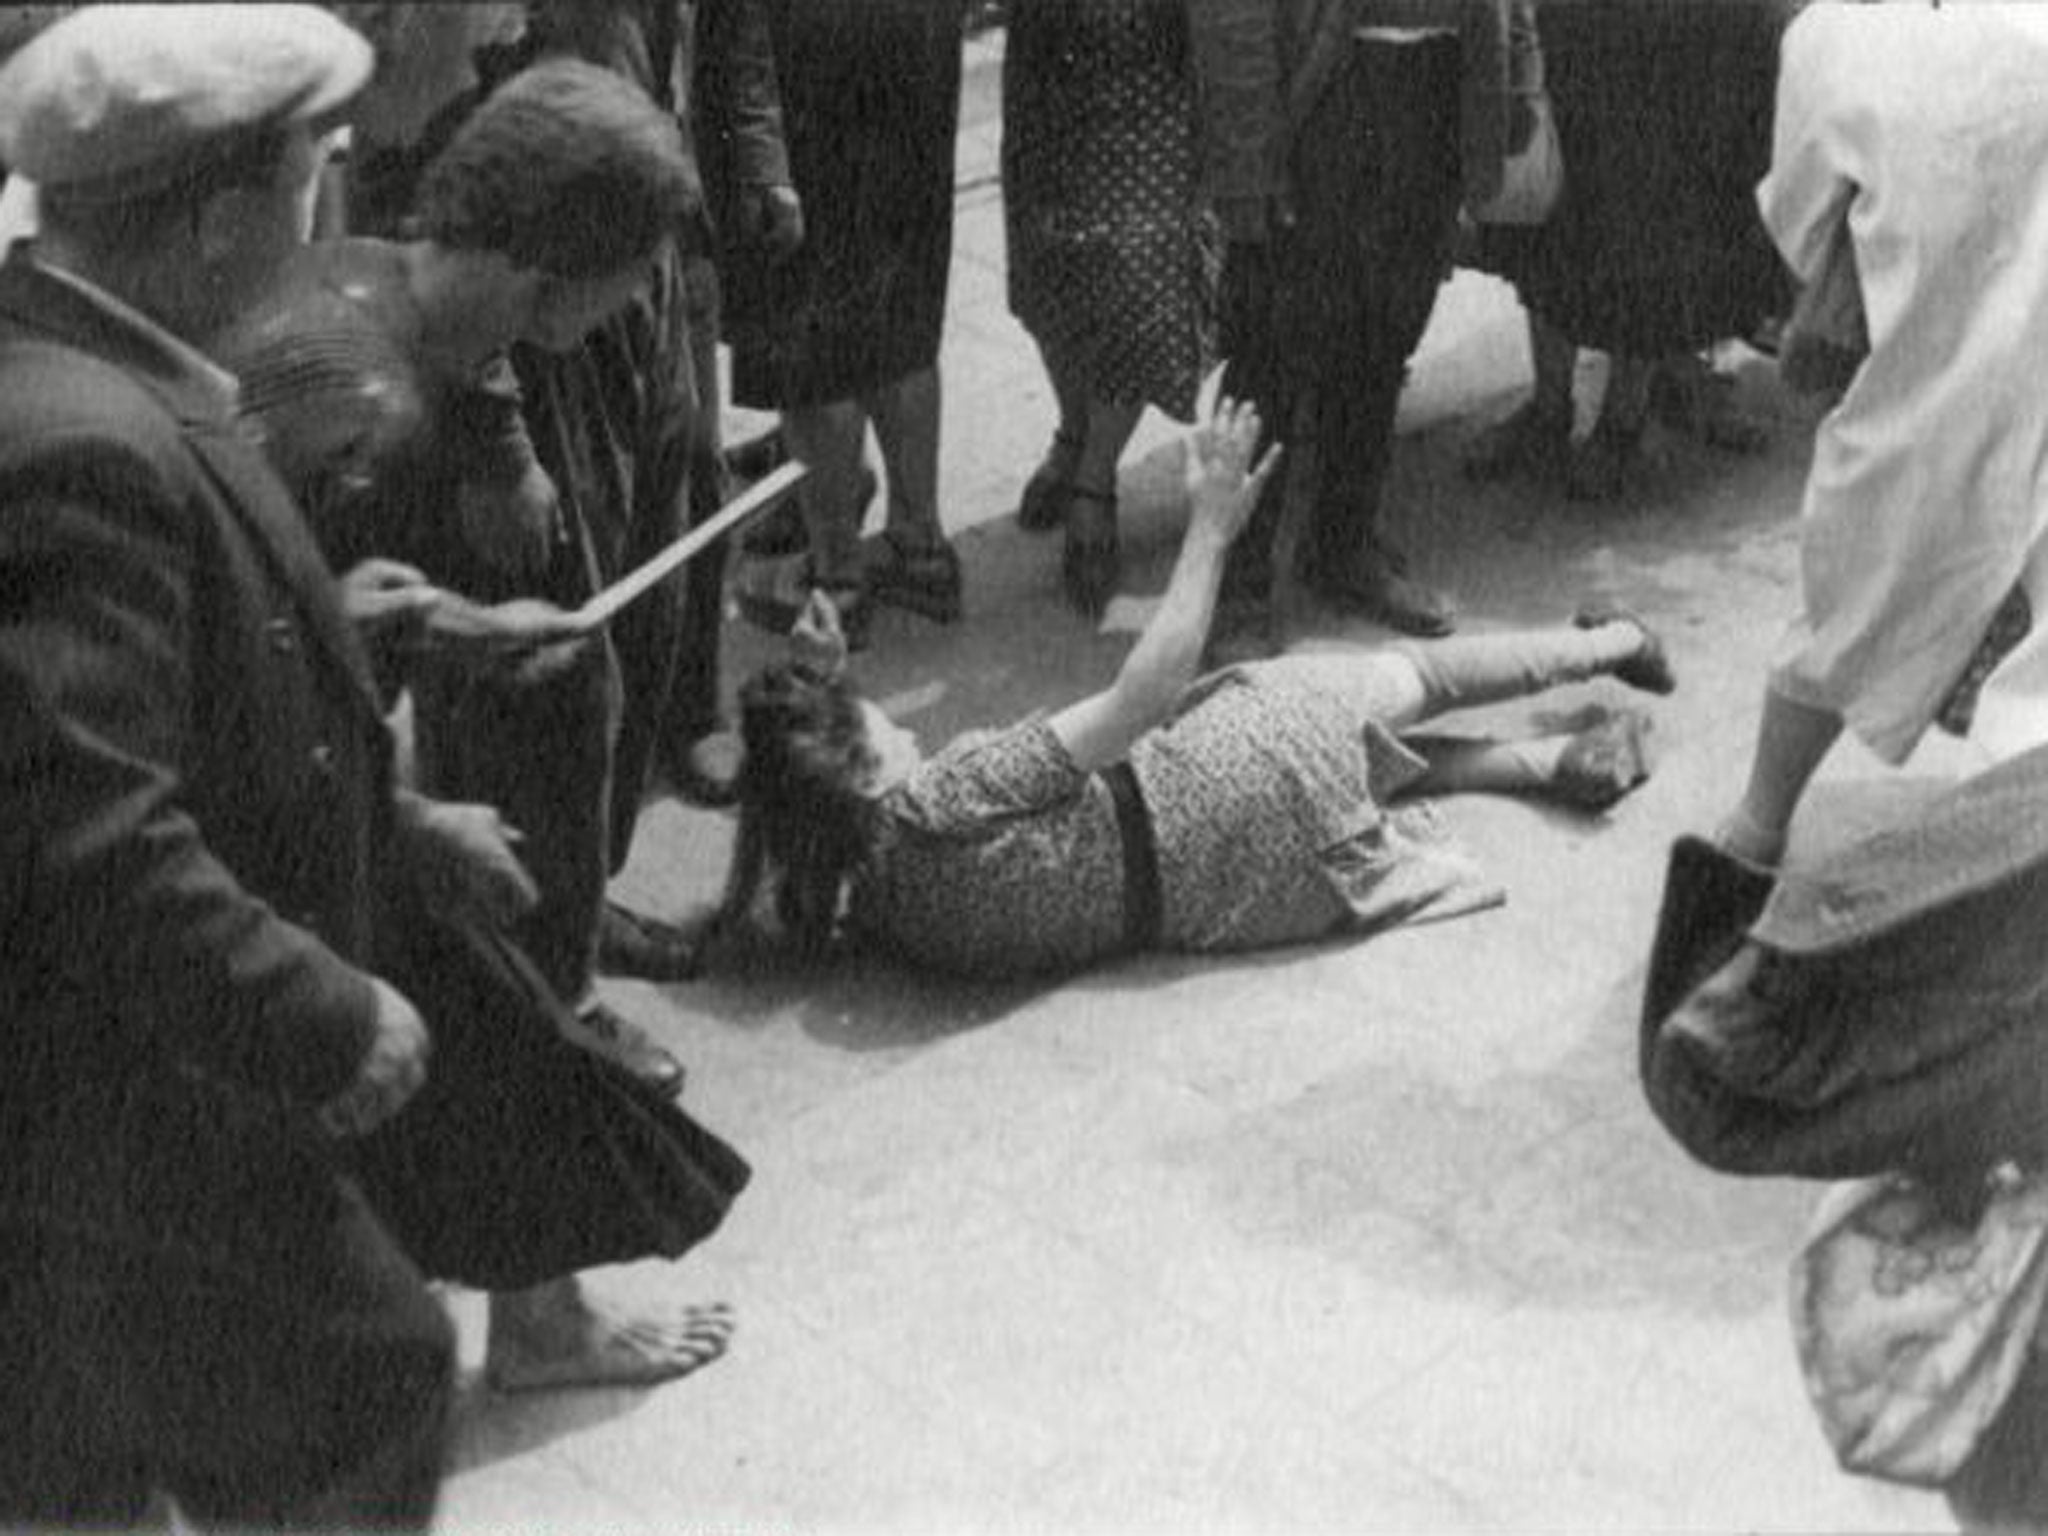 A crowd surrounds a young woman during the1941 progrom